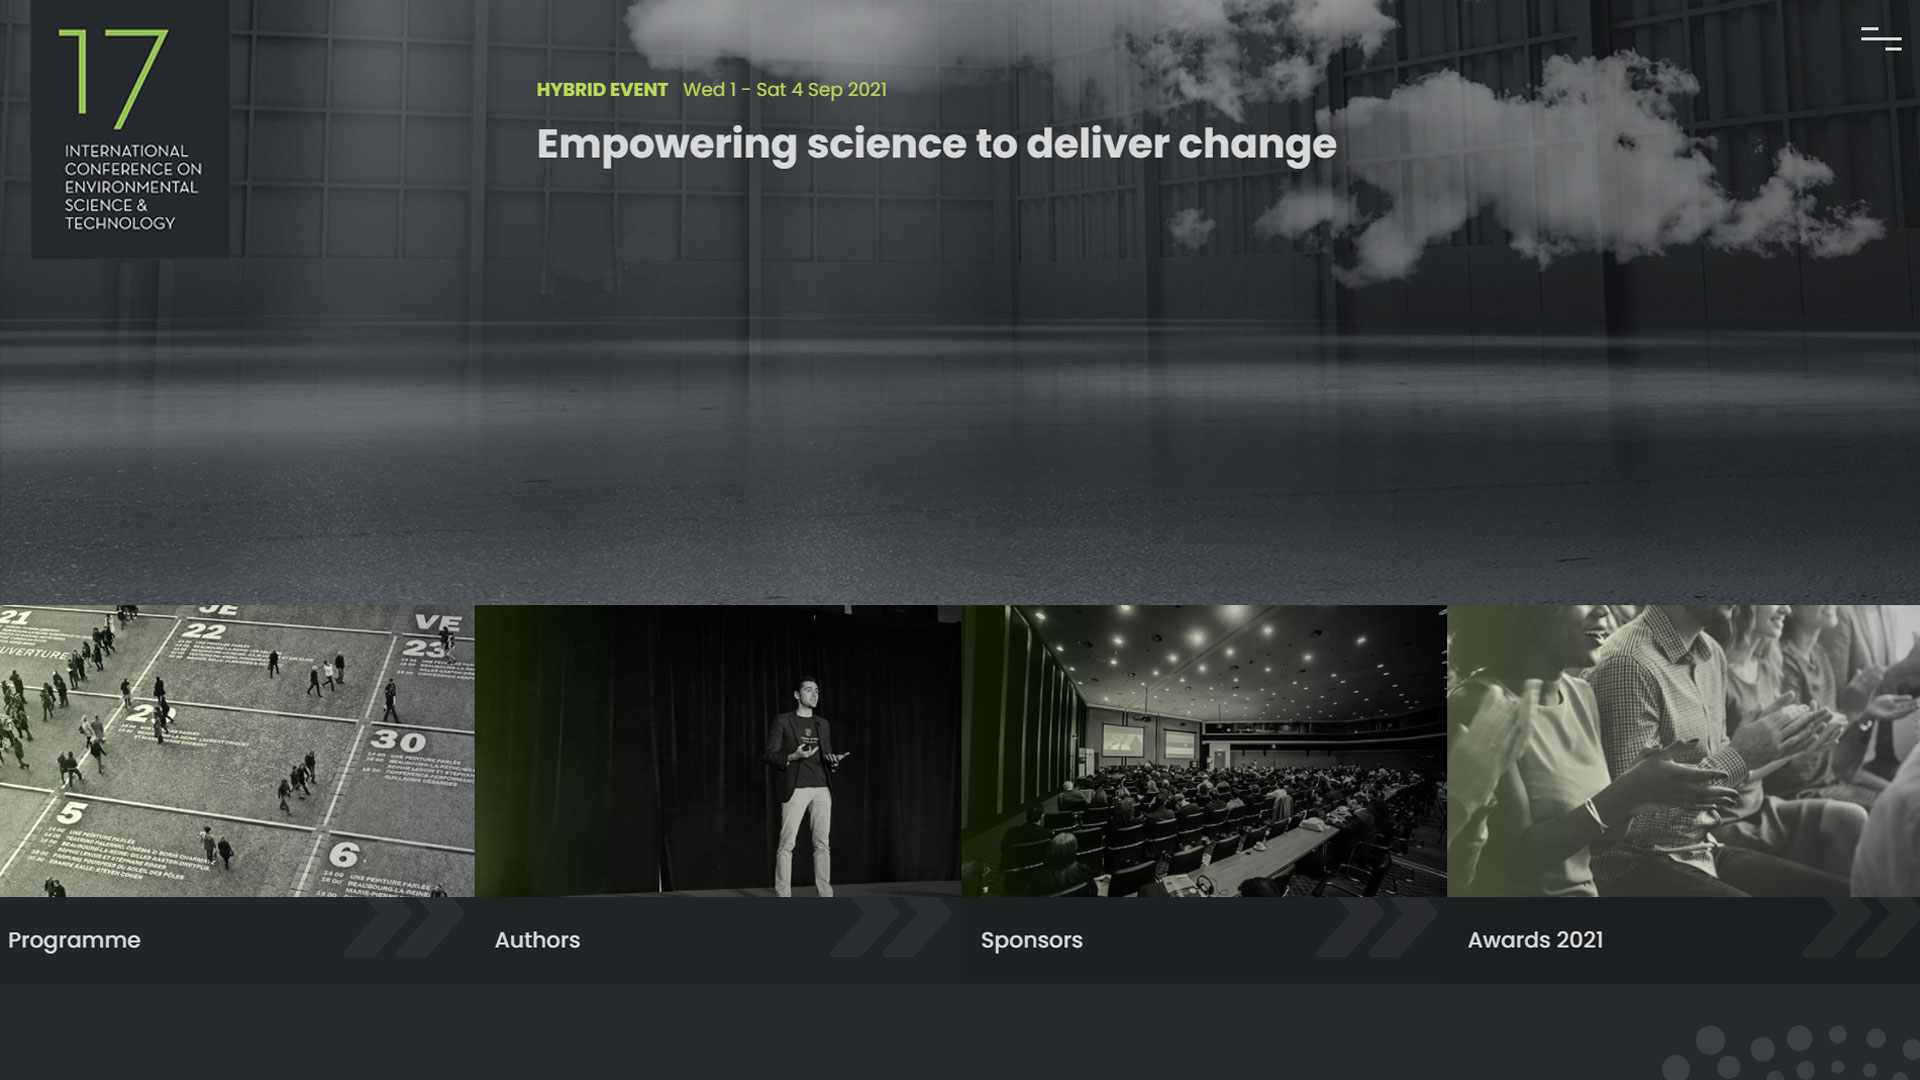 Live Streaming συνεδρίου “17th International Conference on Environmental Science & Technology”